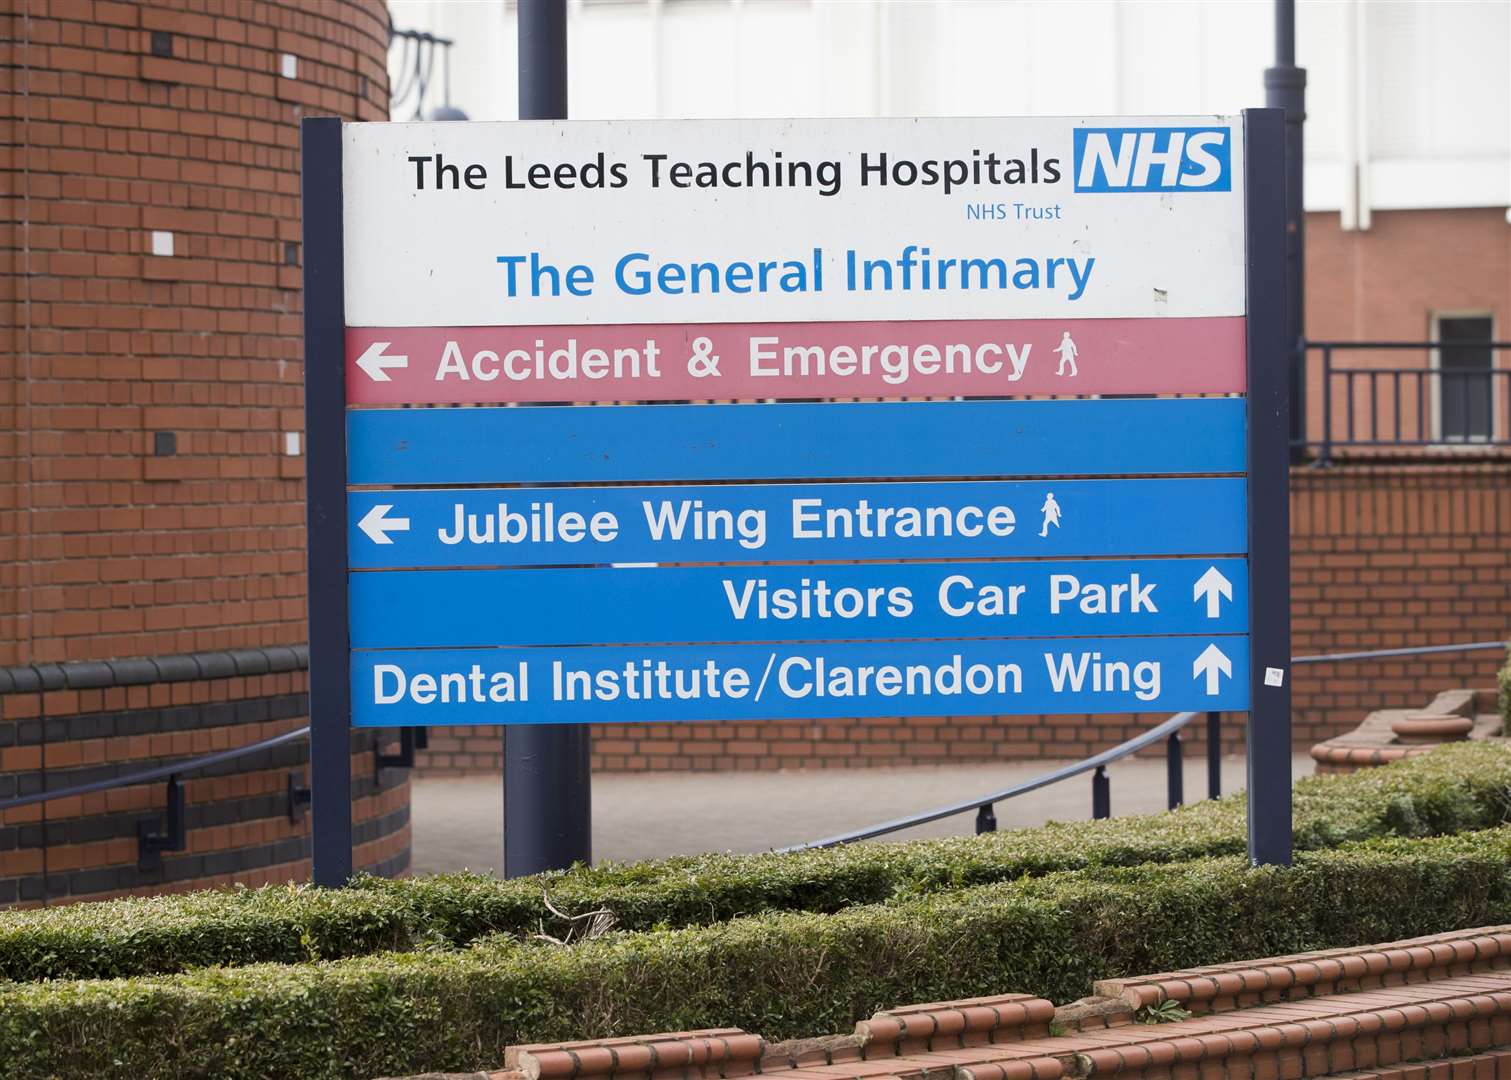 Some operations have been cancelled at Leeds General Infirmary due to a surge in Covid patients (Danny Lawson/PA)